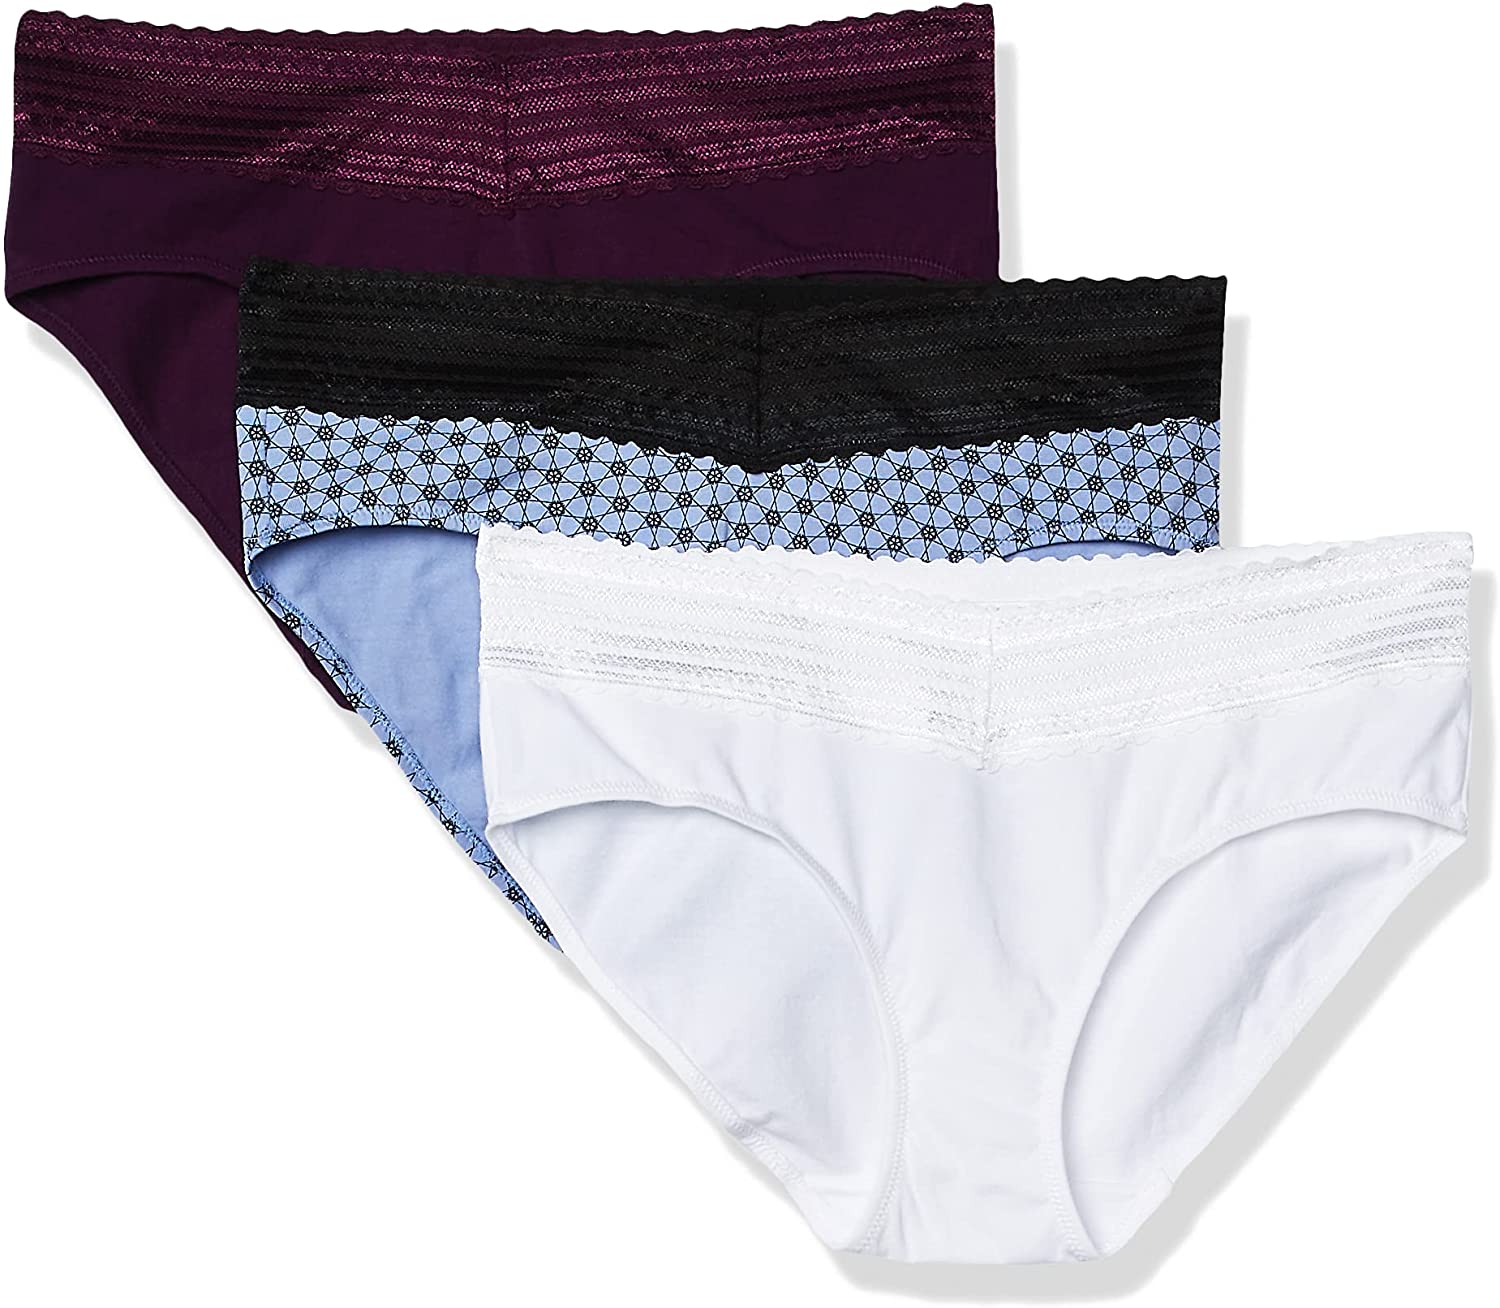 Warner's Women's Blissful Benefits No Muffin Top 3 Pack Hipster Panties